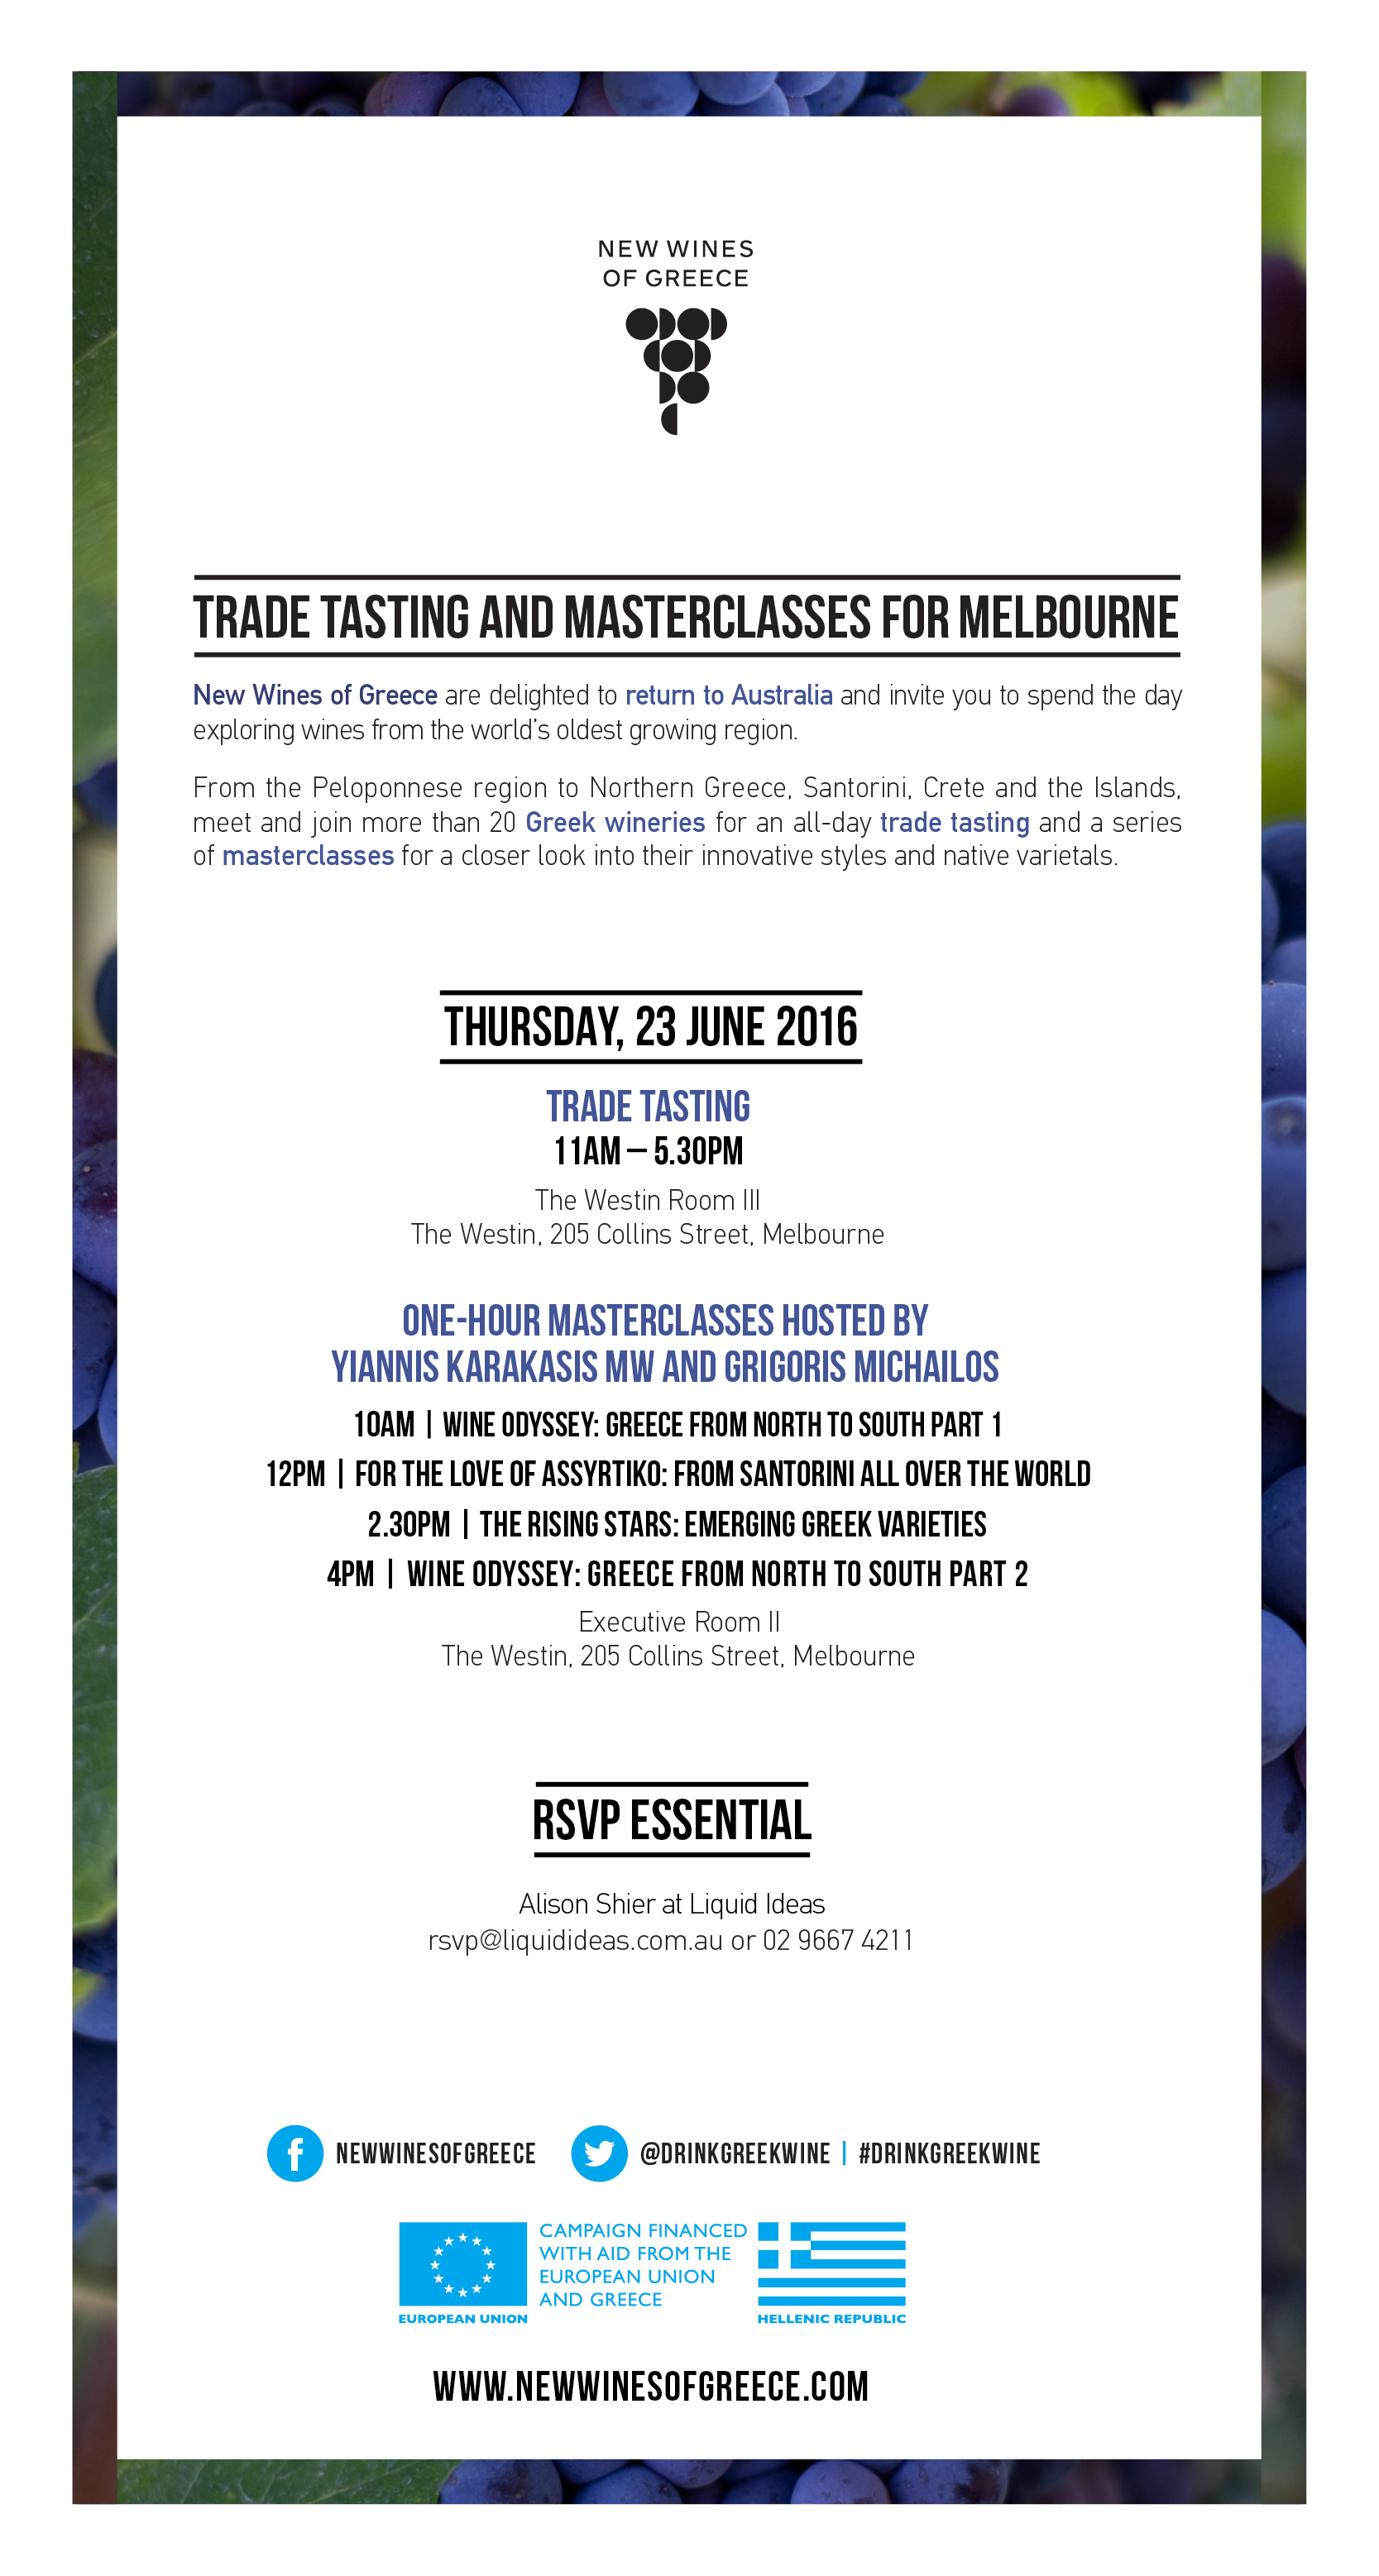 Trade tasting and masterclasses for Melbourne